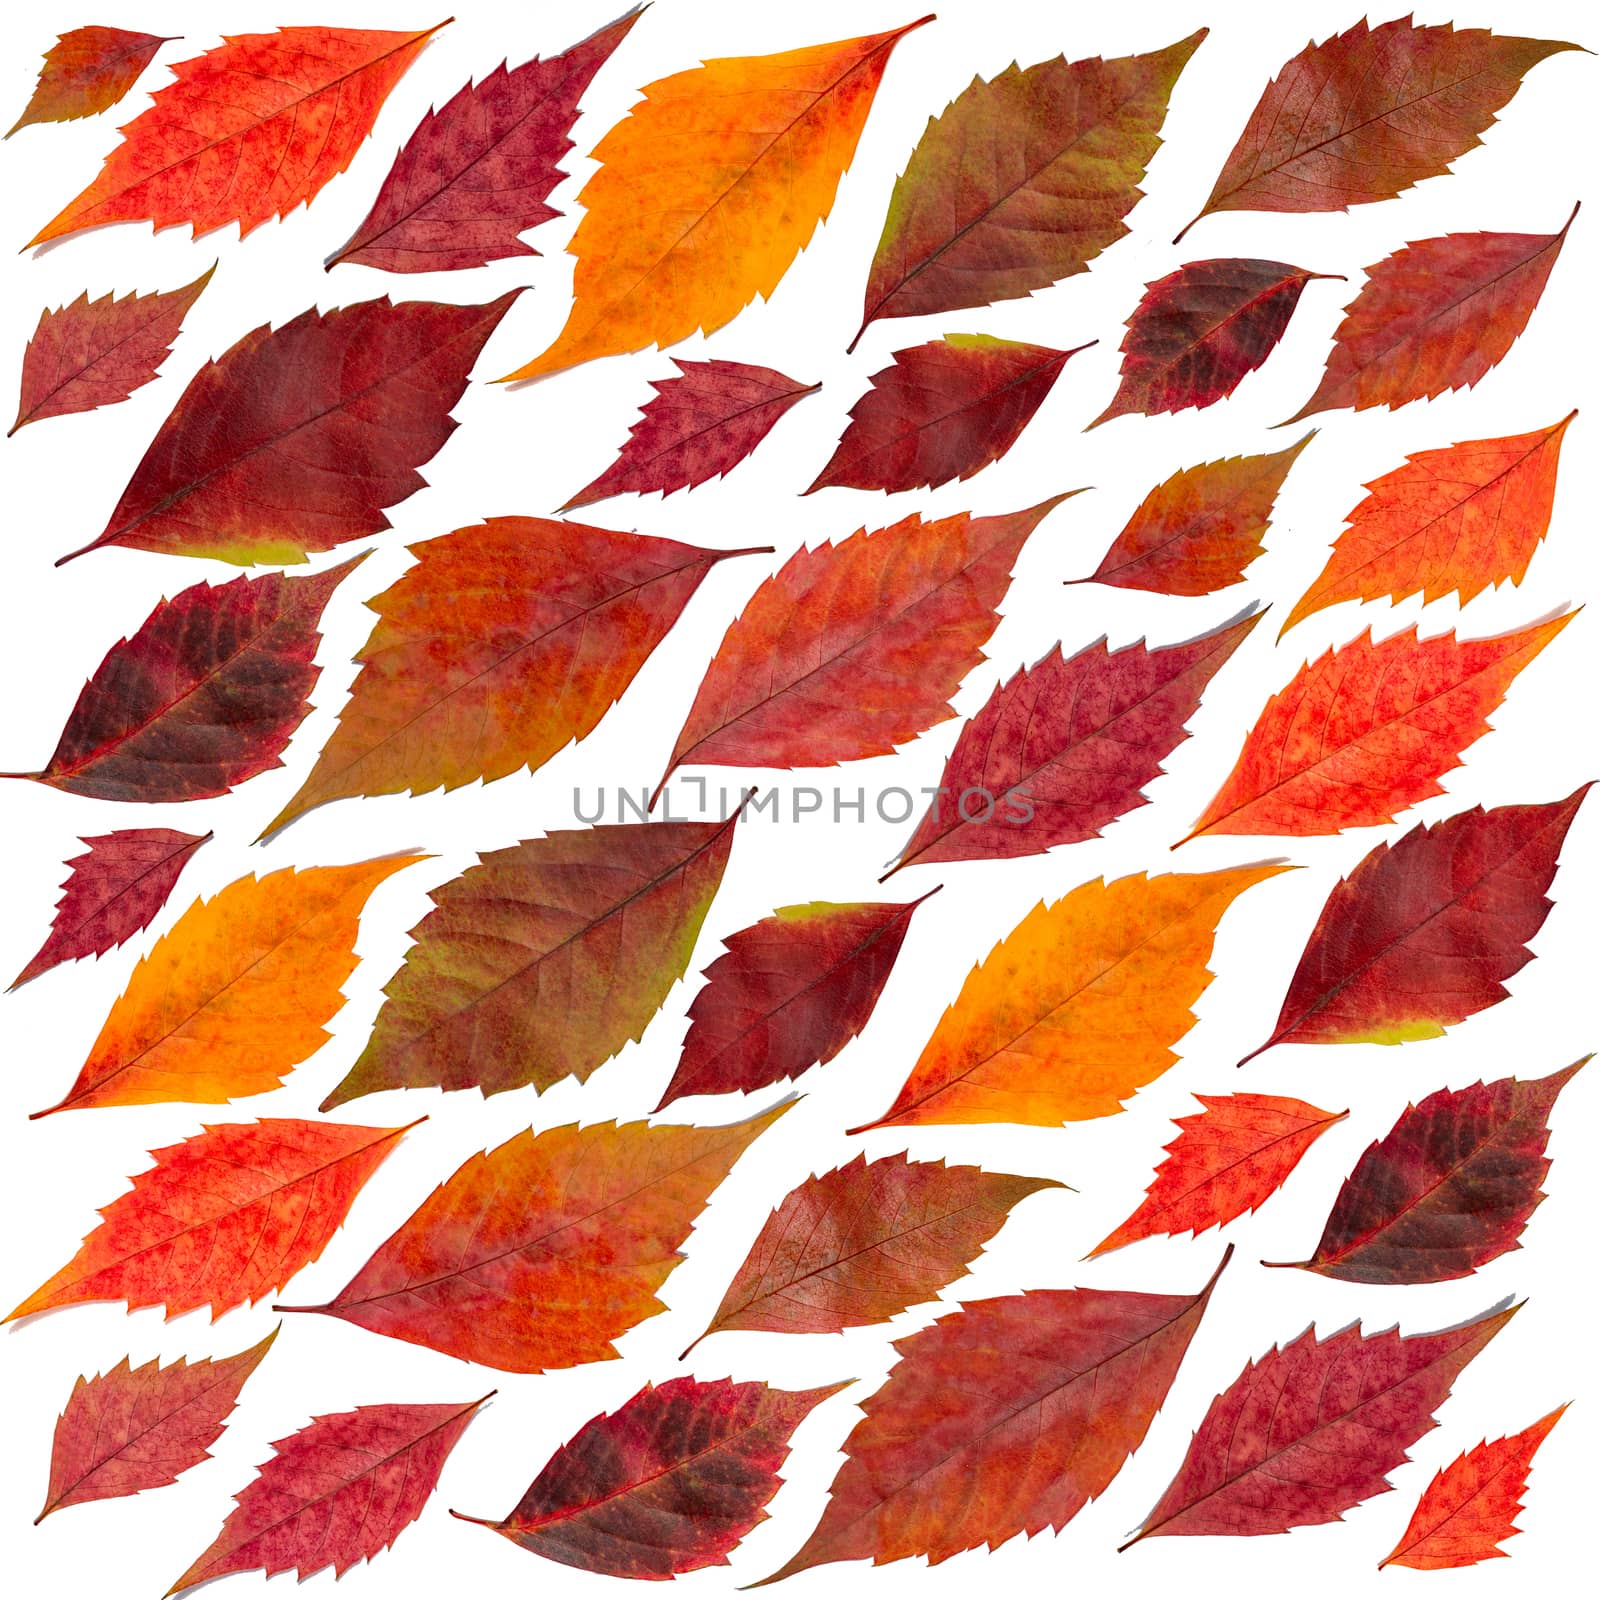 Photo of the sheet from above. Autumn leaves on a white background.